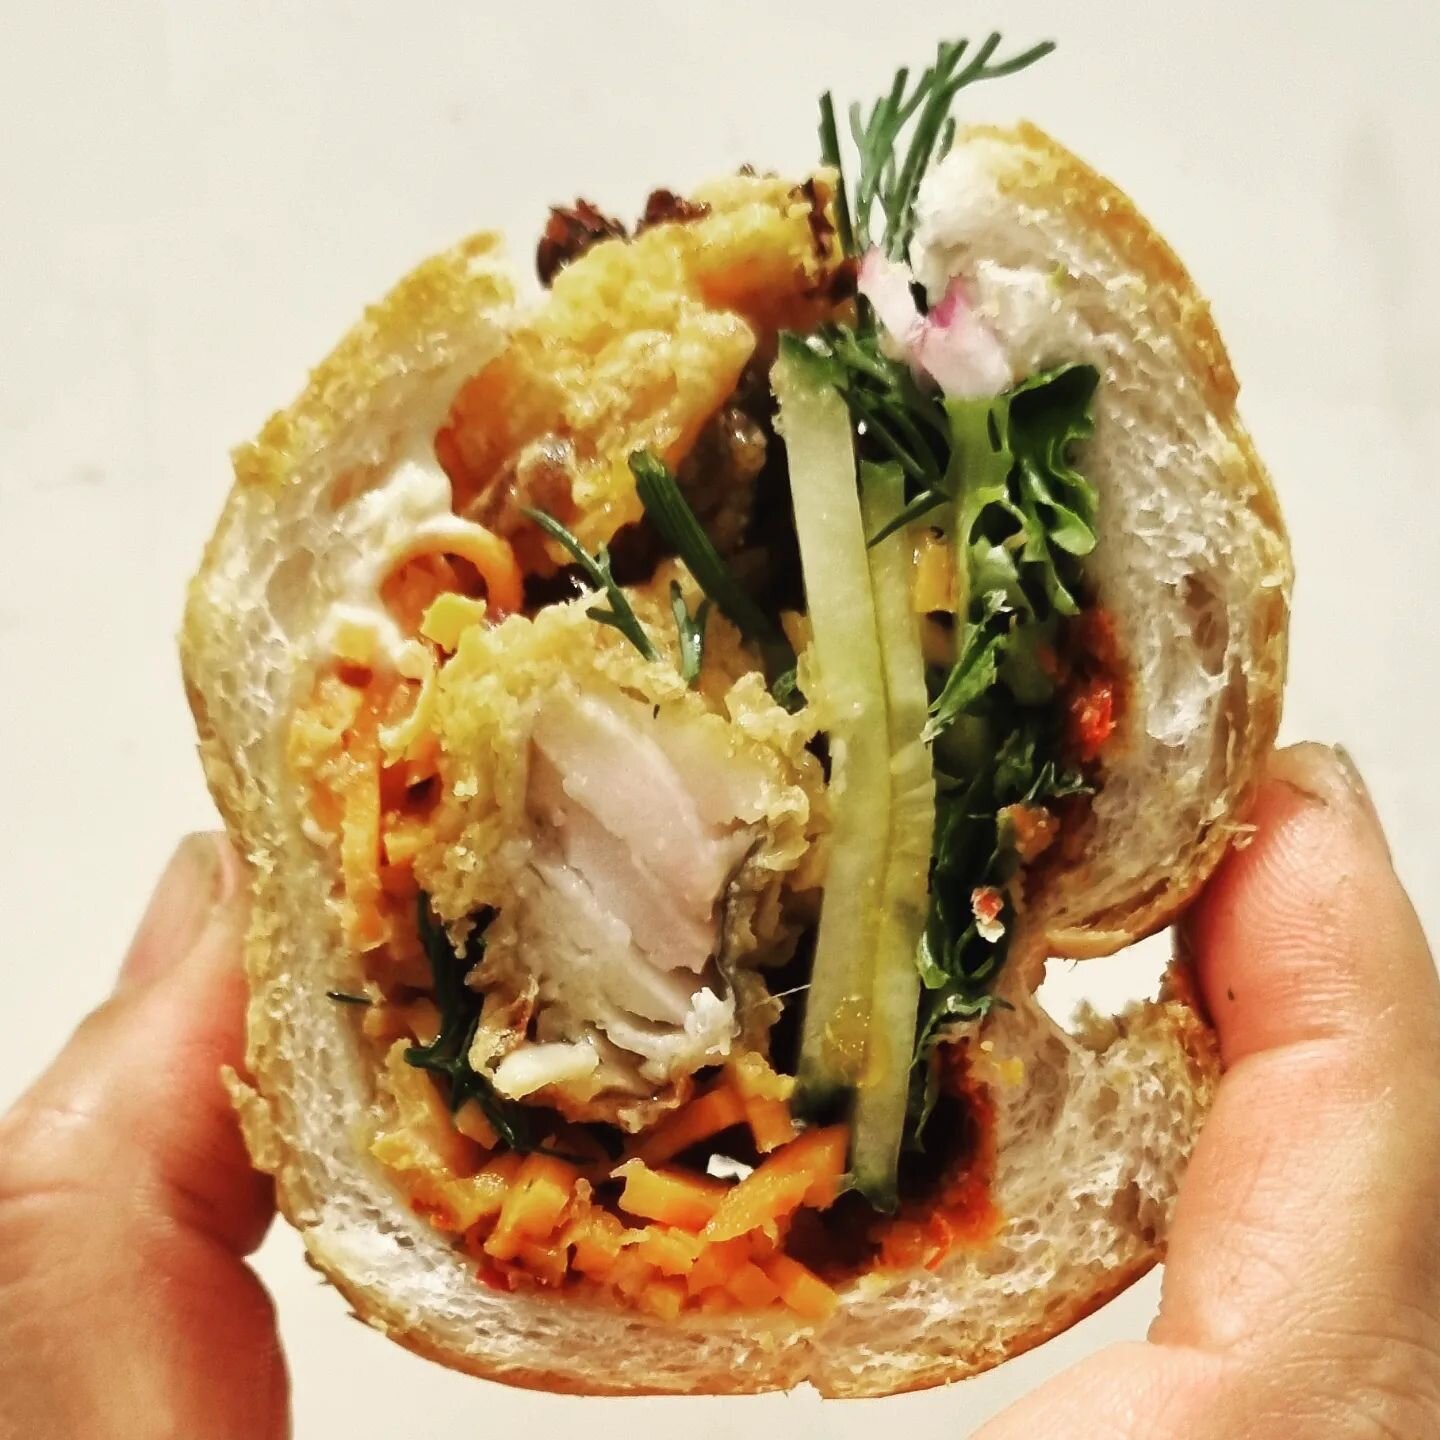 Cross-section of a King Dory banh mi that is available only for today

King Dory fillets dredge in chickpea flour and fried
Lots of dill, red onions and our trademark 🌶 red curry paste and crispy chilli

Like a fillet-o-fish but 🤌🏻